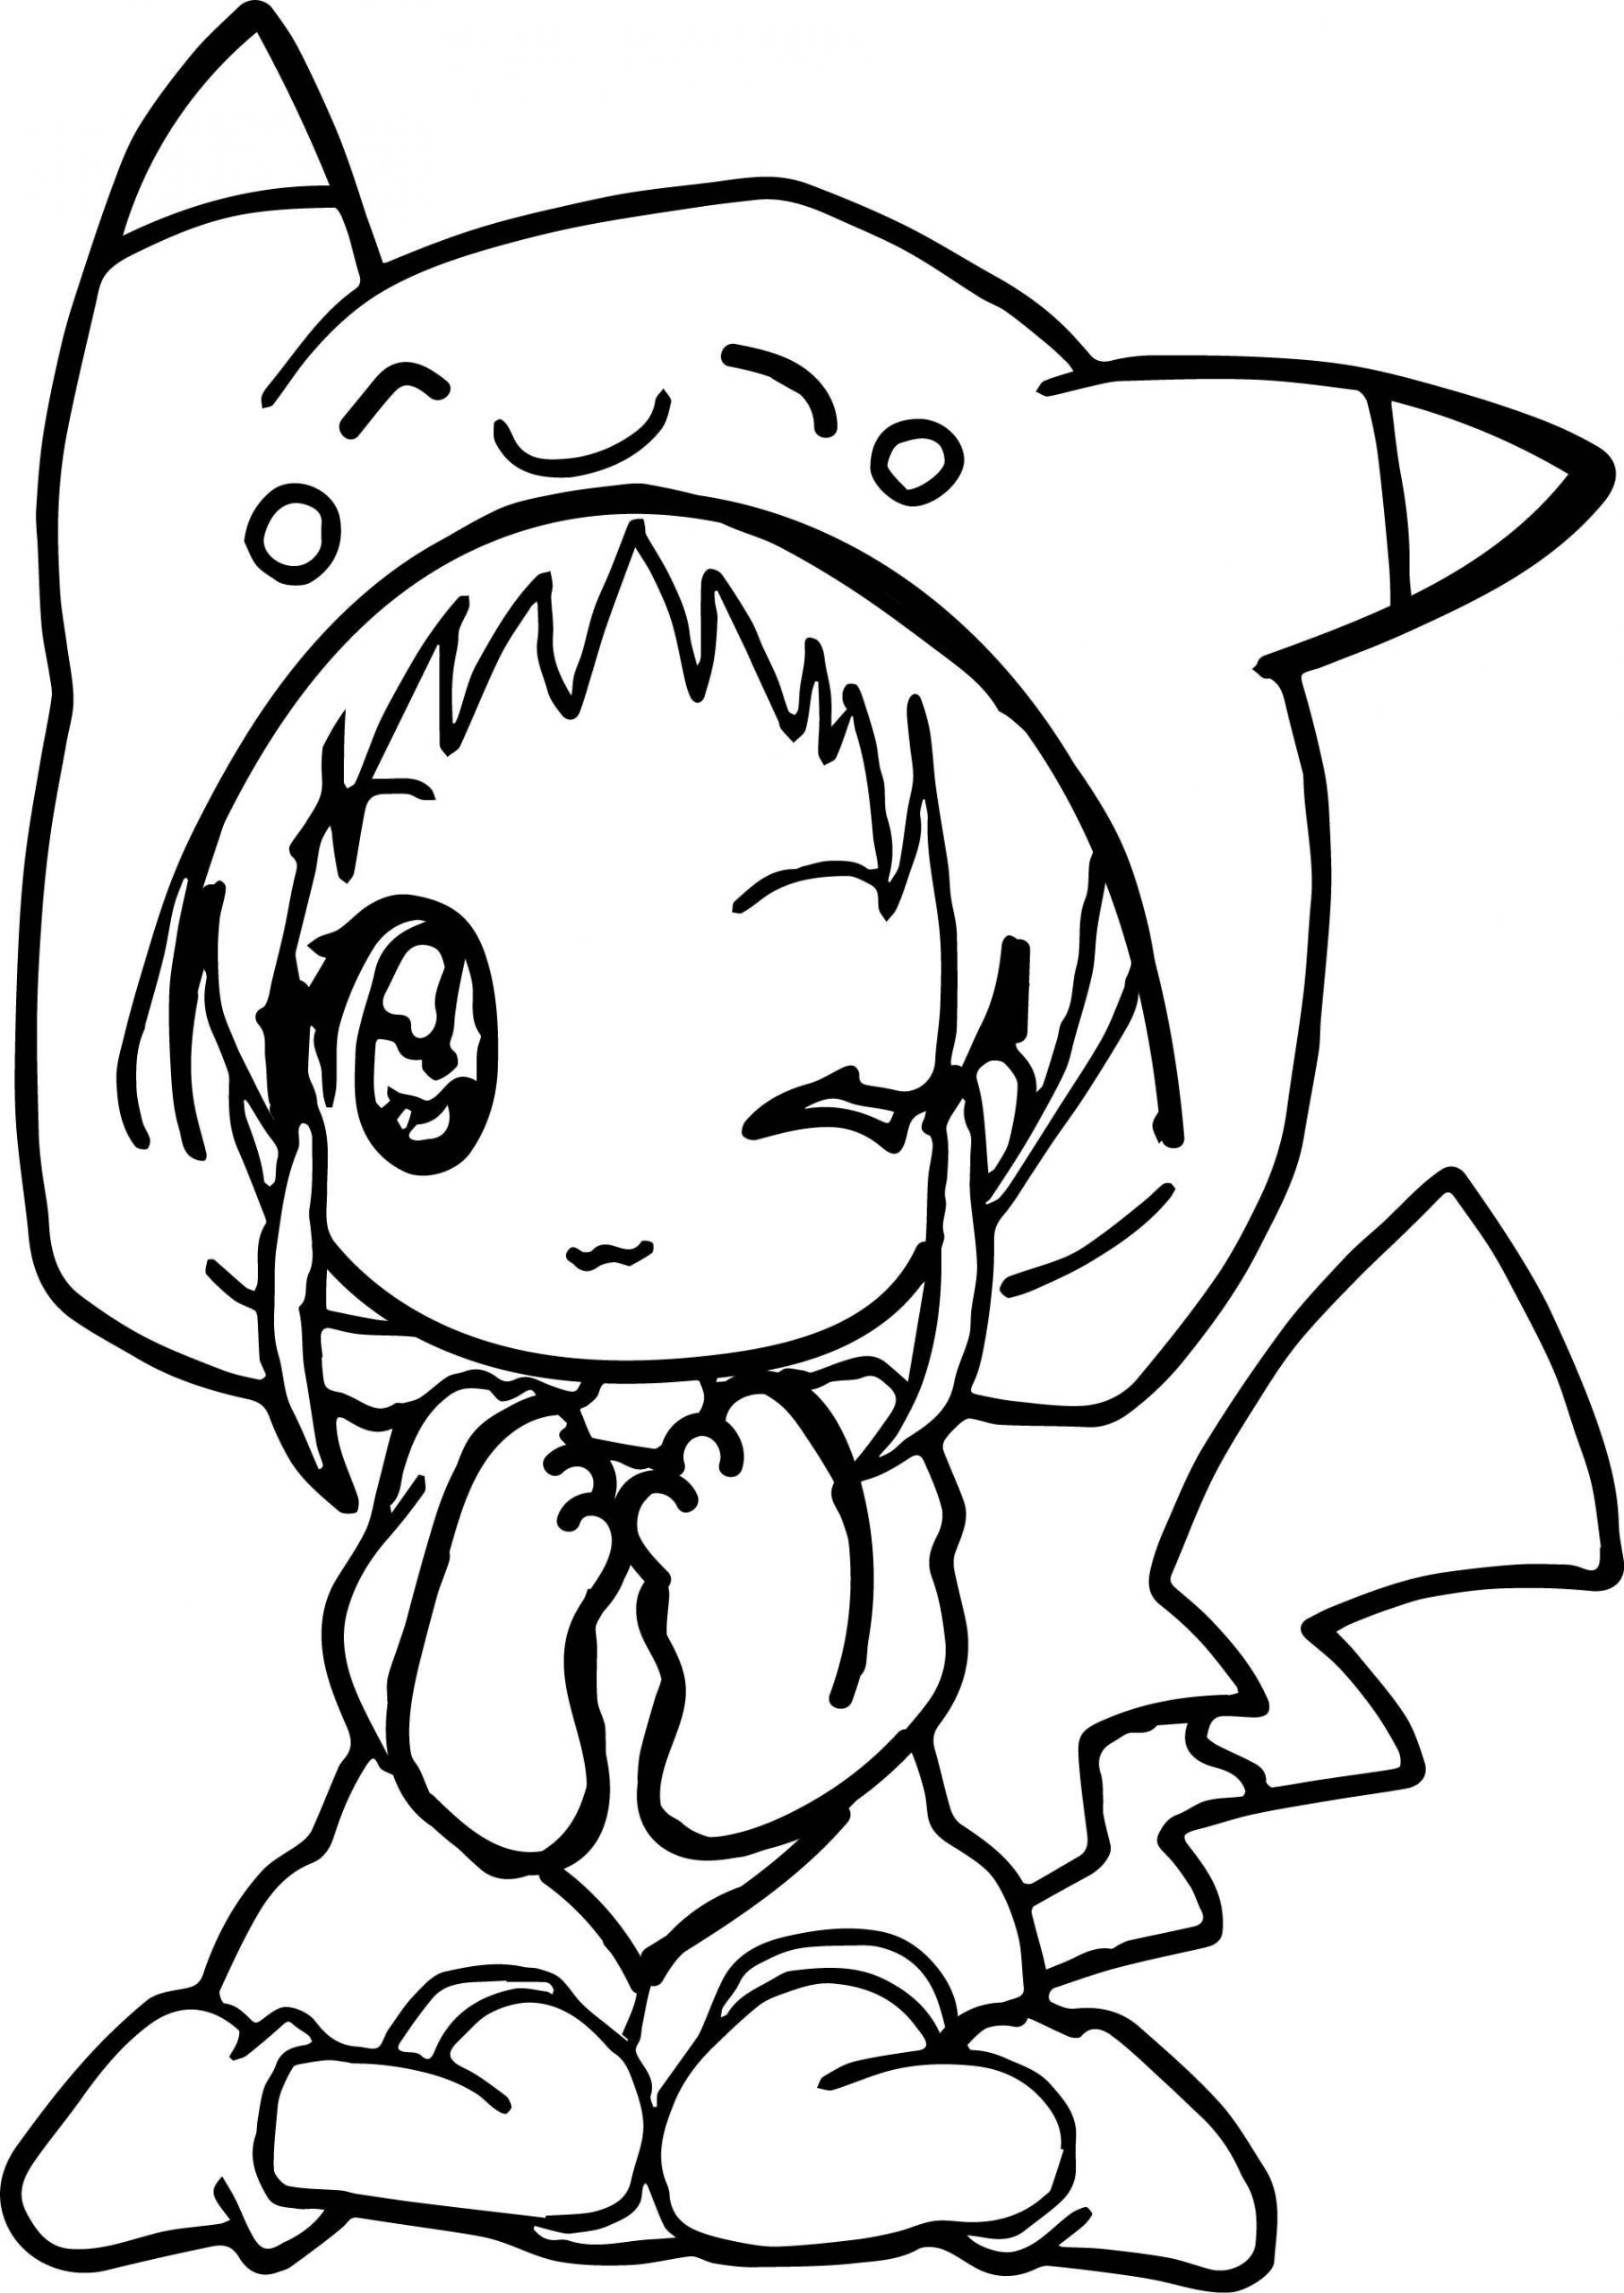 Kawaii Girls Coloring Pages
 Pin on Dez